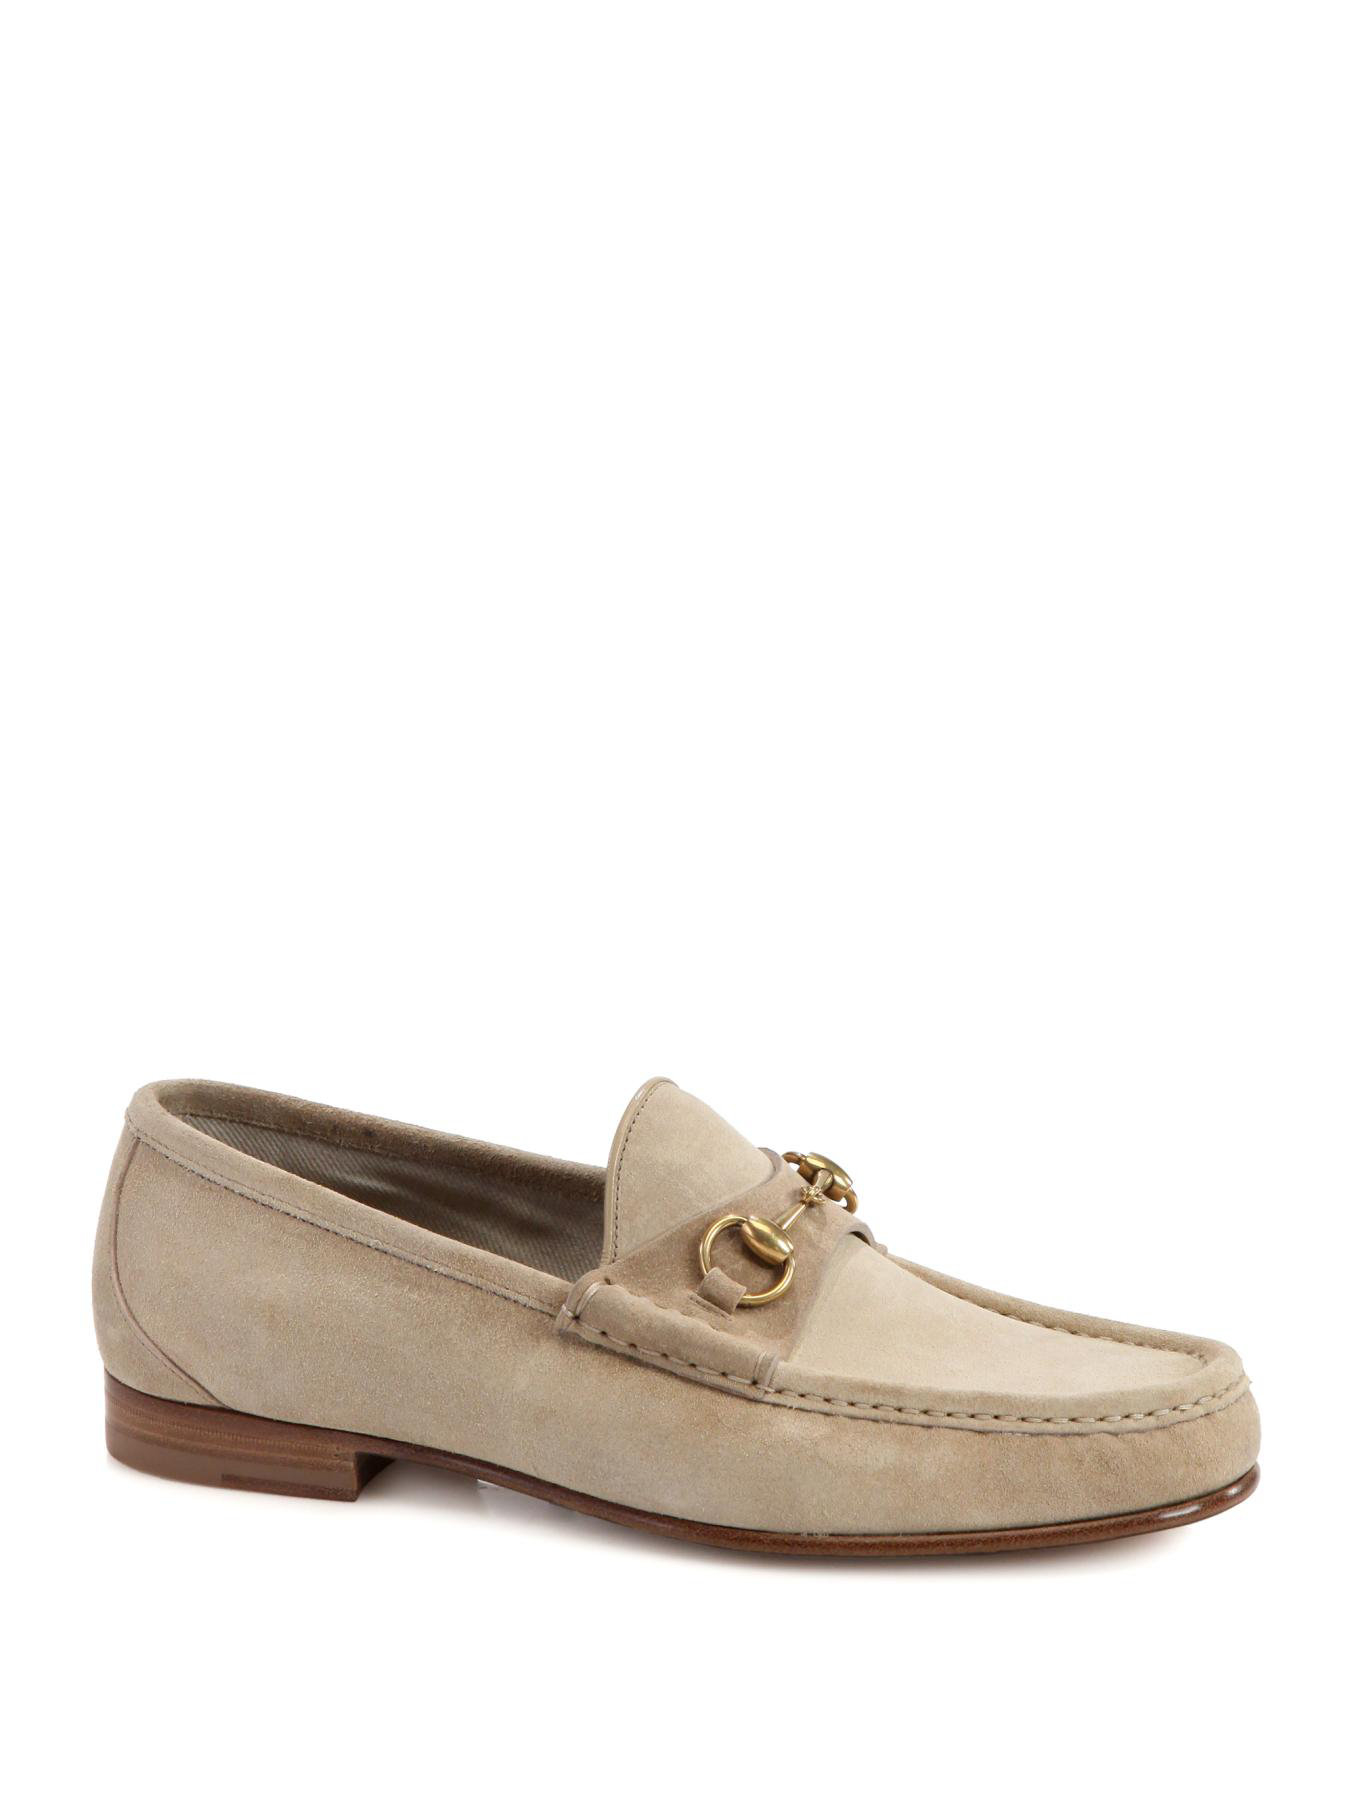 Gucci Roos Suede Horsebit Loafers in Natural for | Lyst